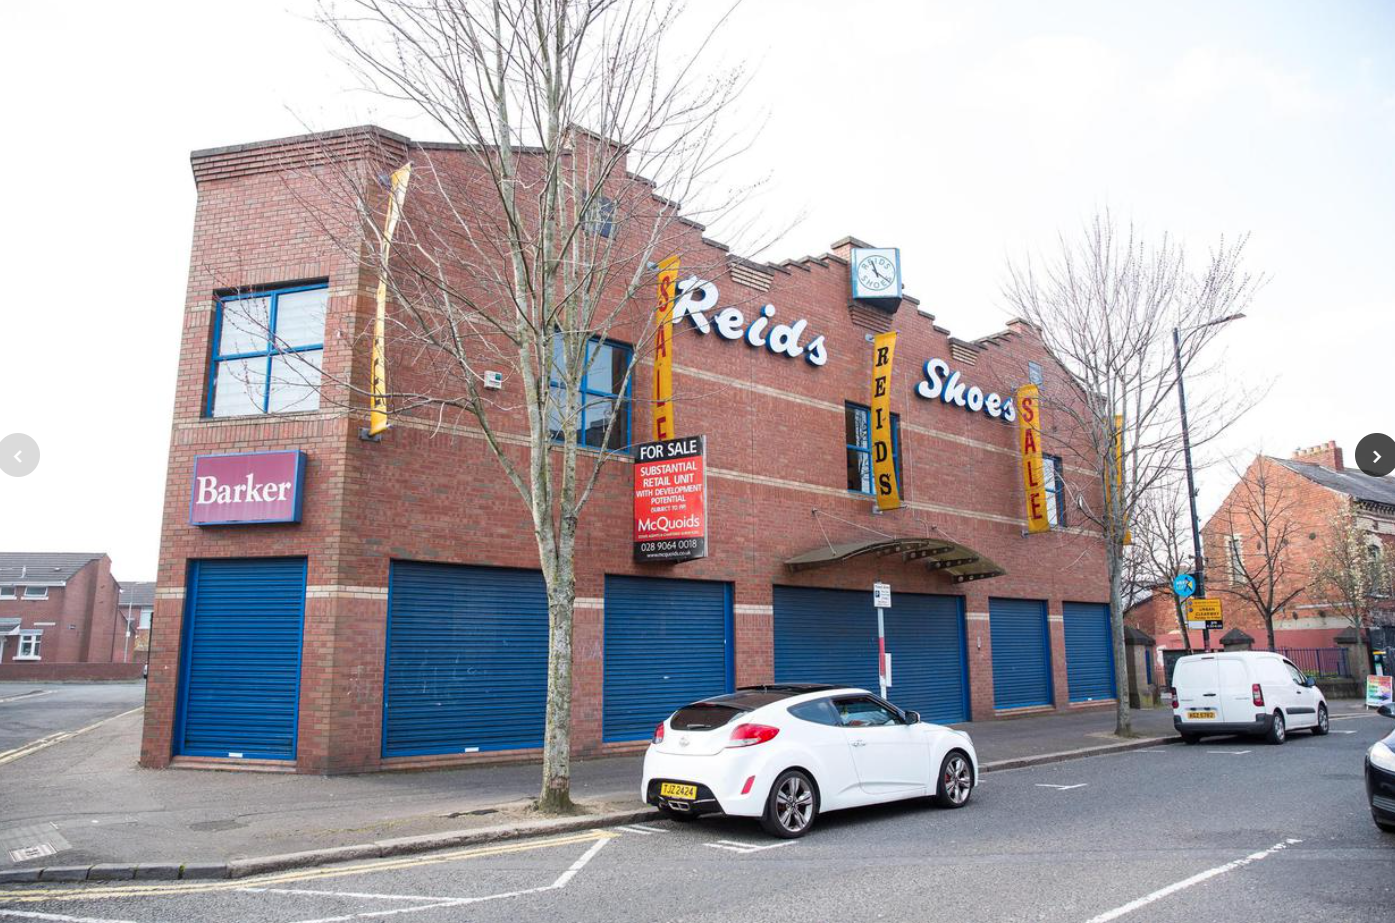 End of an era as Reids Shoes goes on the market